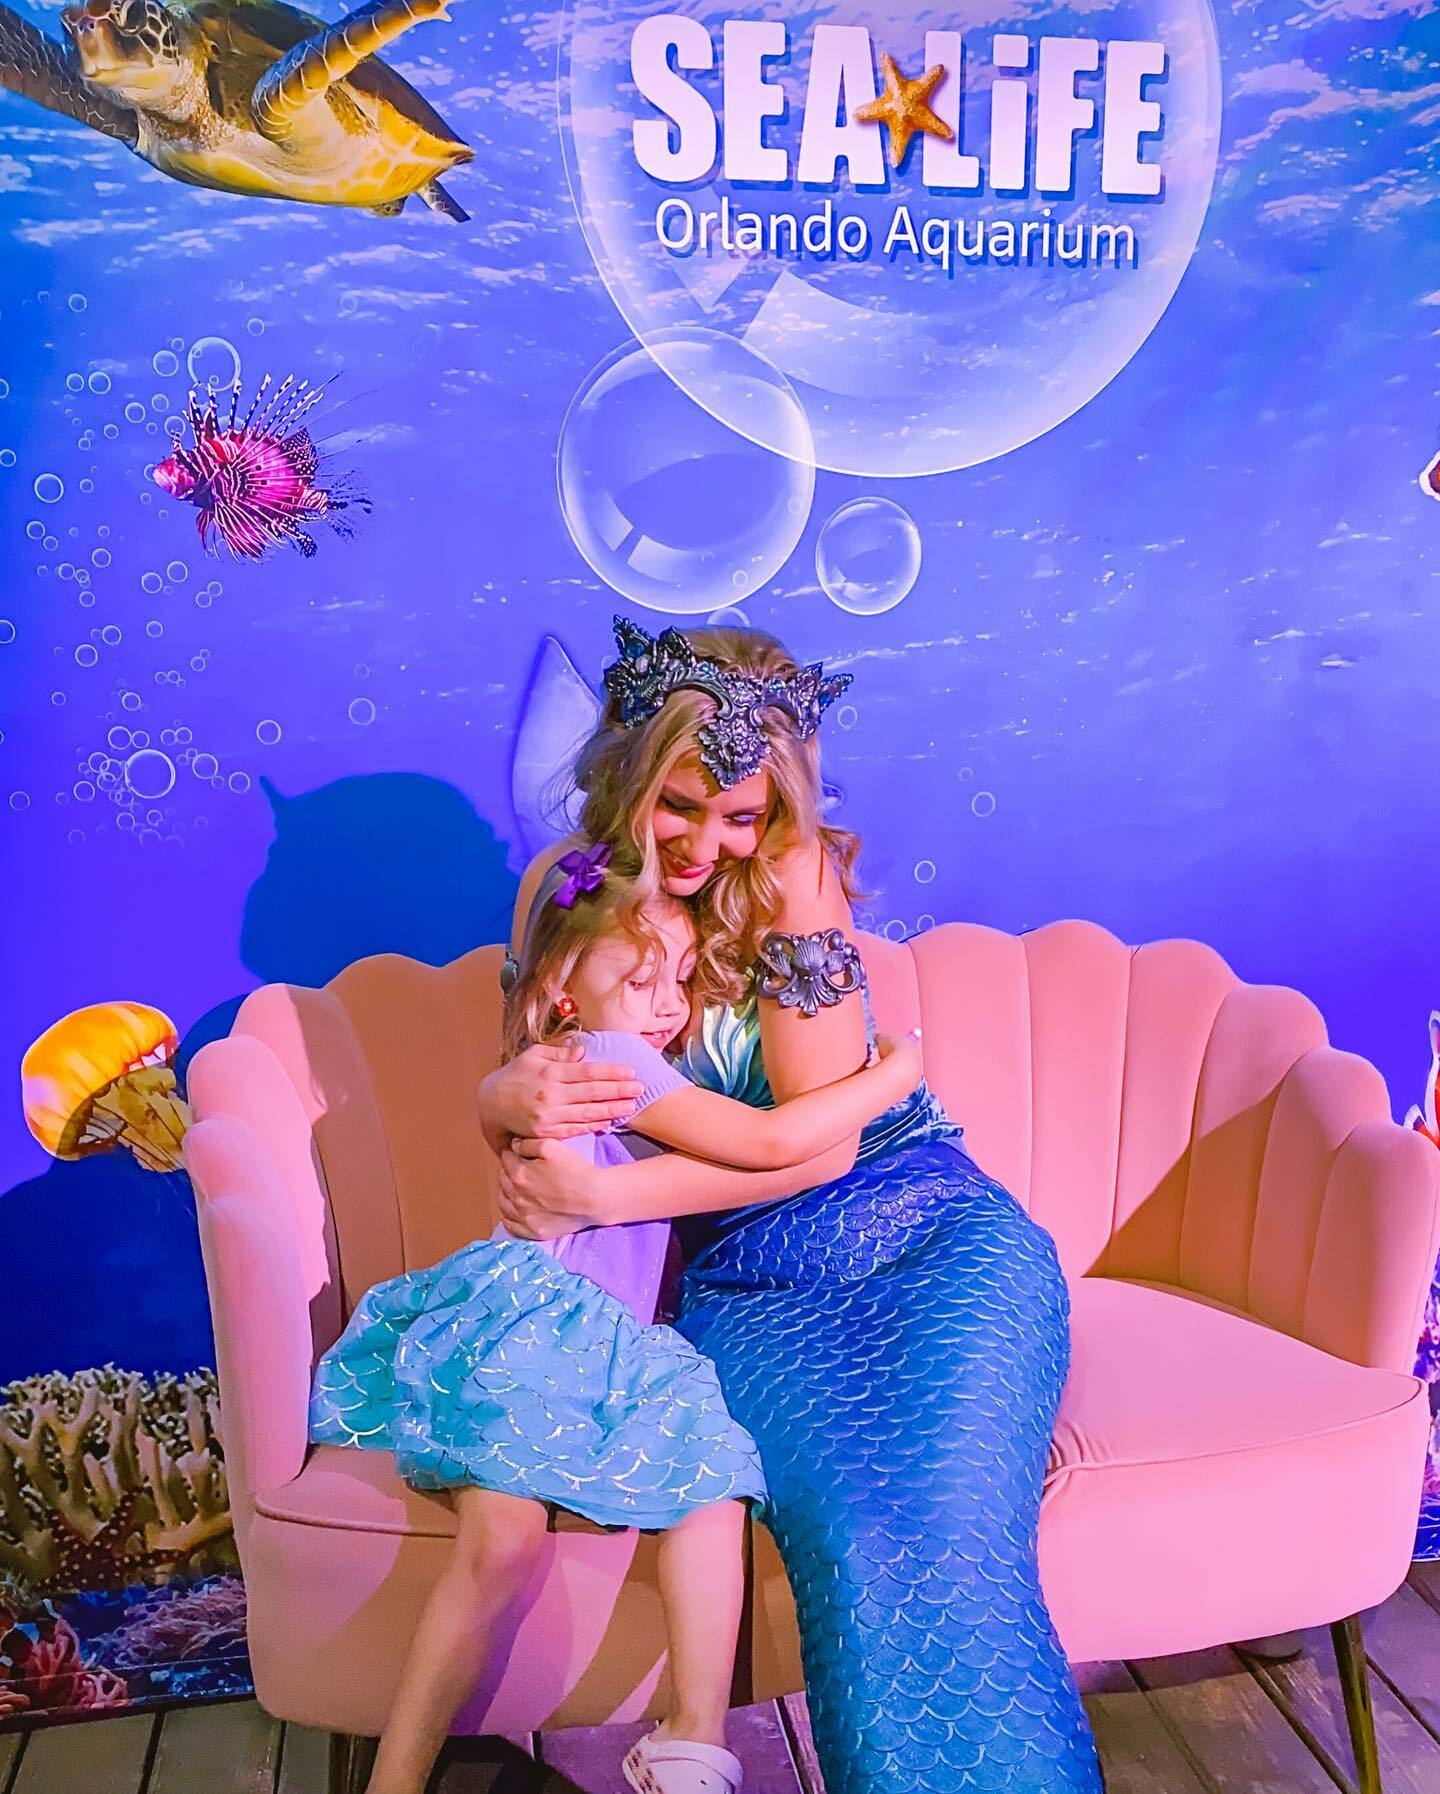 A mermaid embraces a young girl on a pink sofa at the SEA LIFE Orlando aquarium, with ocean-themed decor and logo in the background.